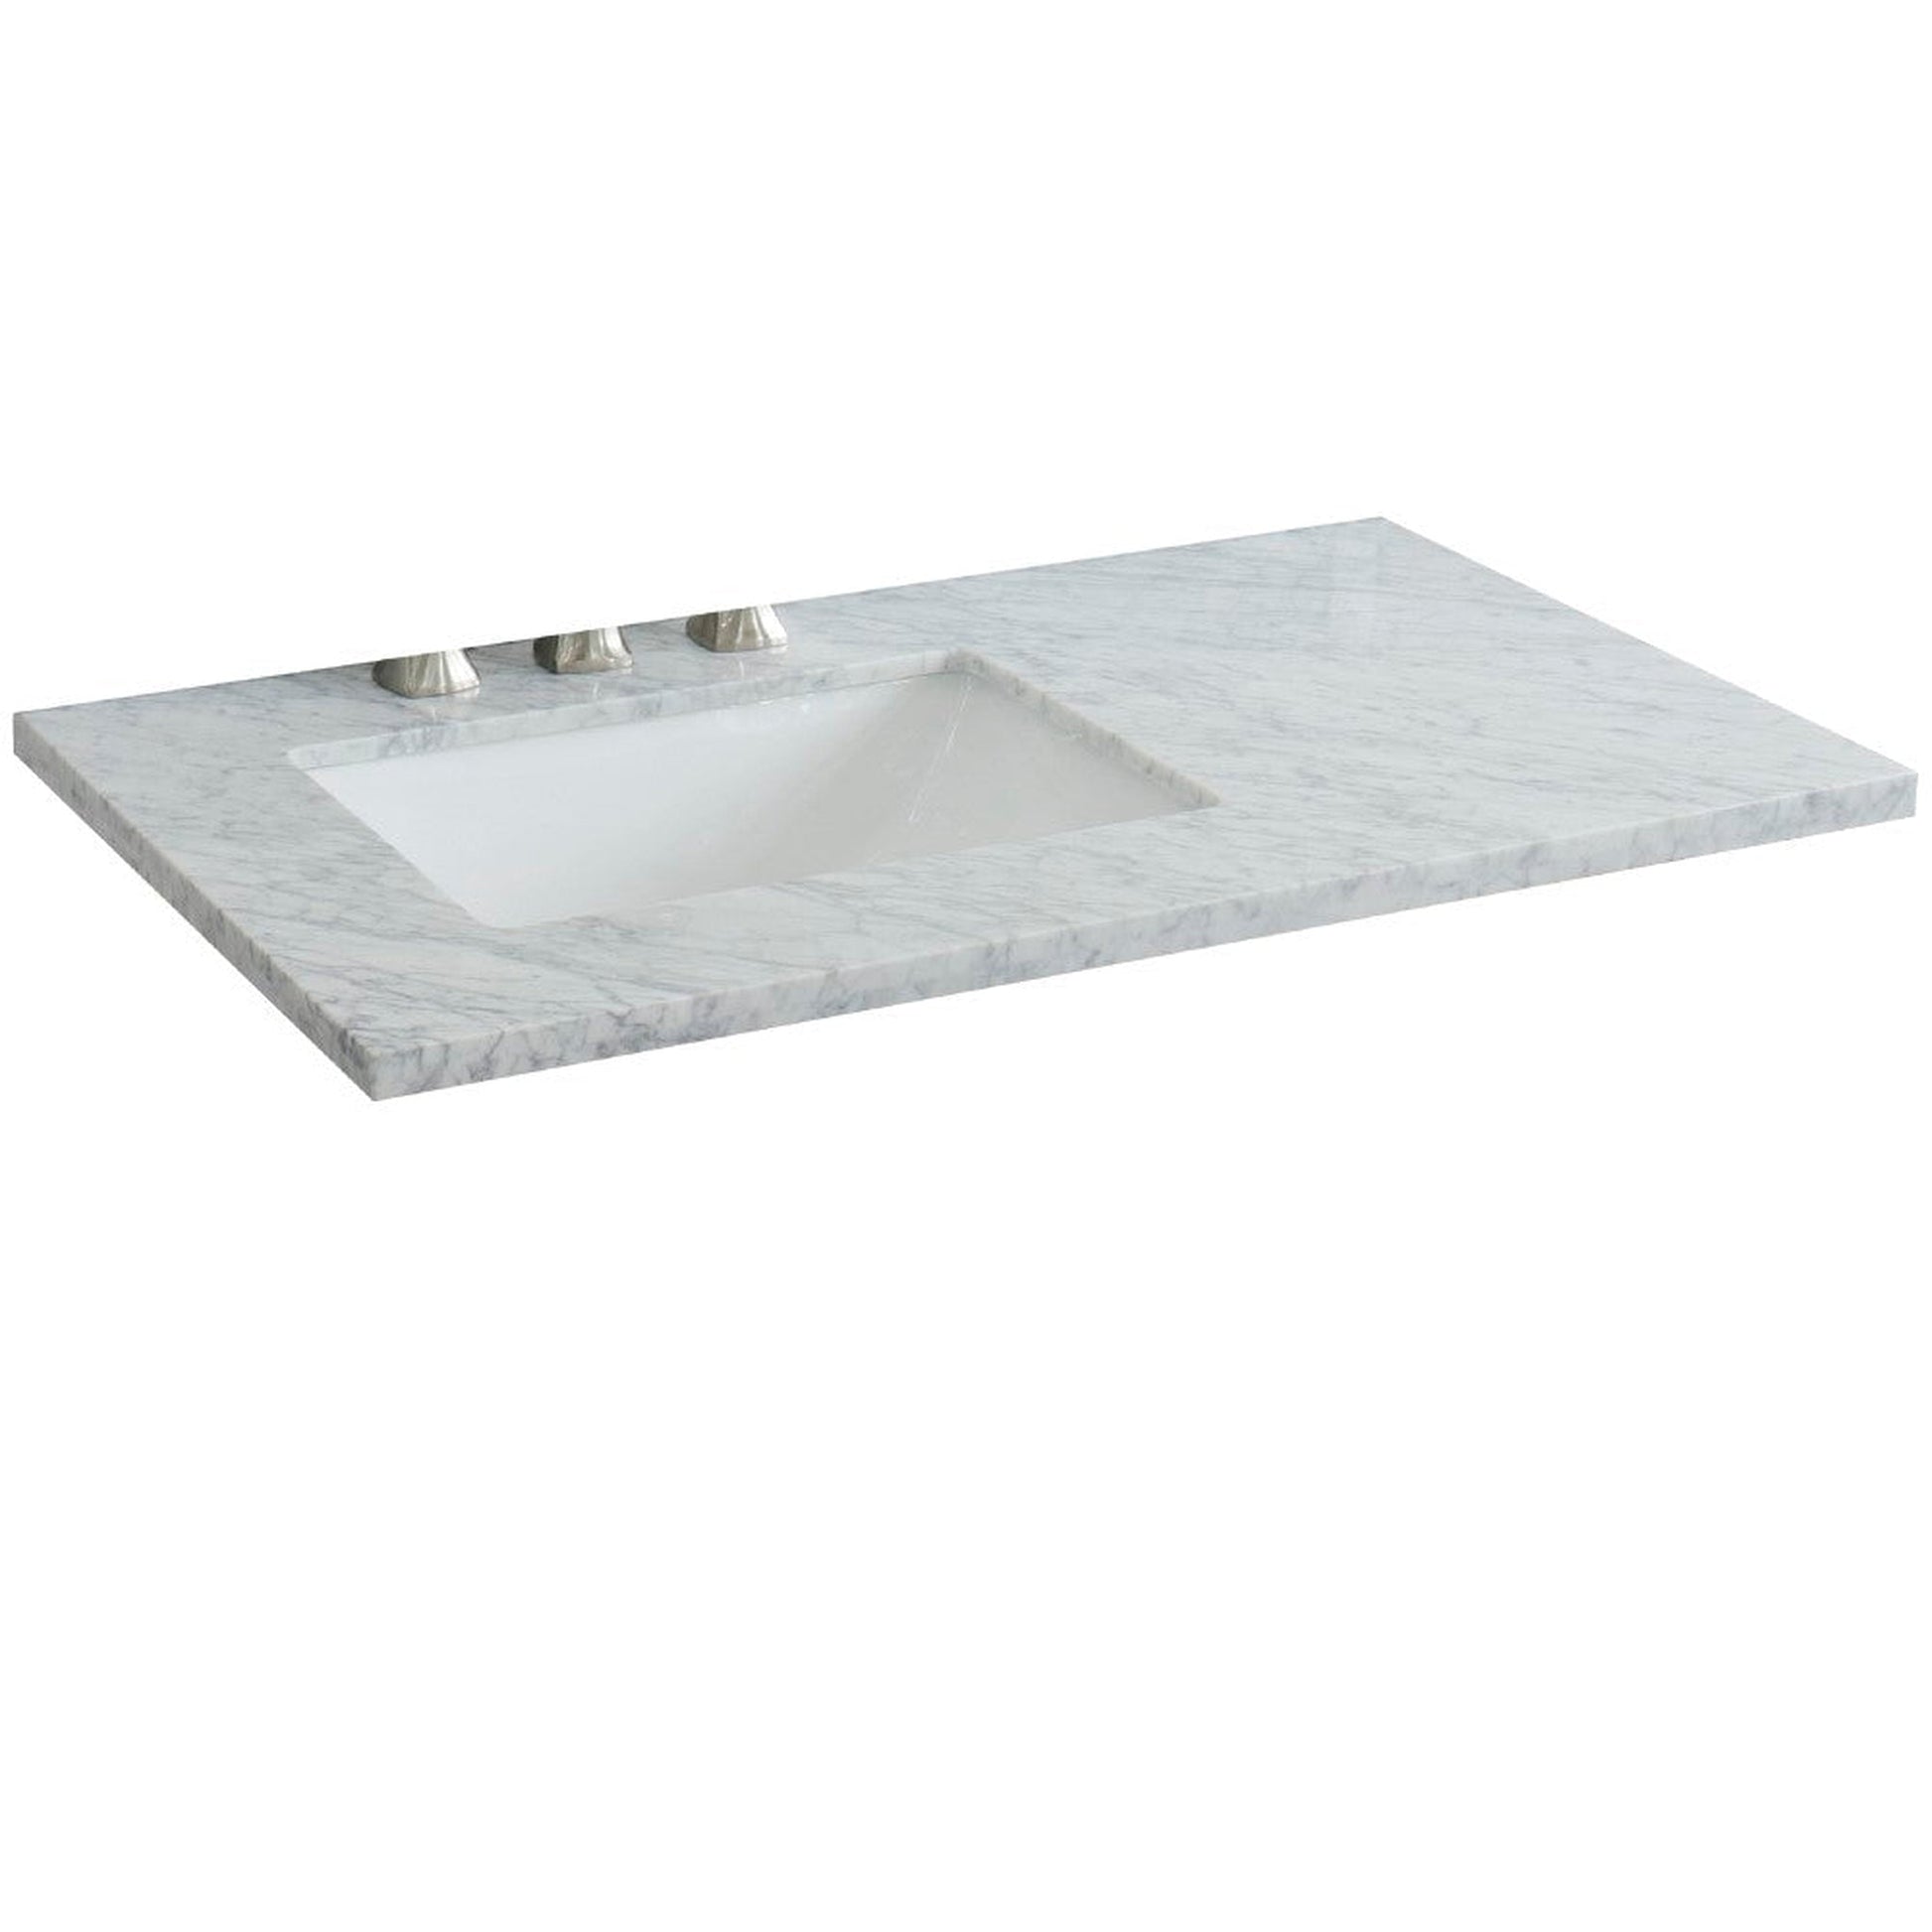 Bellaterra Home 37" x 22" White Carrara Marble Three Hole Vanity Top With Left Offset Undermount Rectangular Sink and Overflow